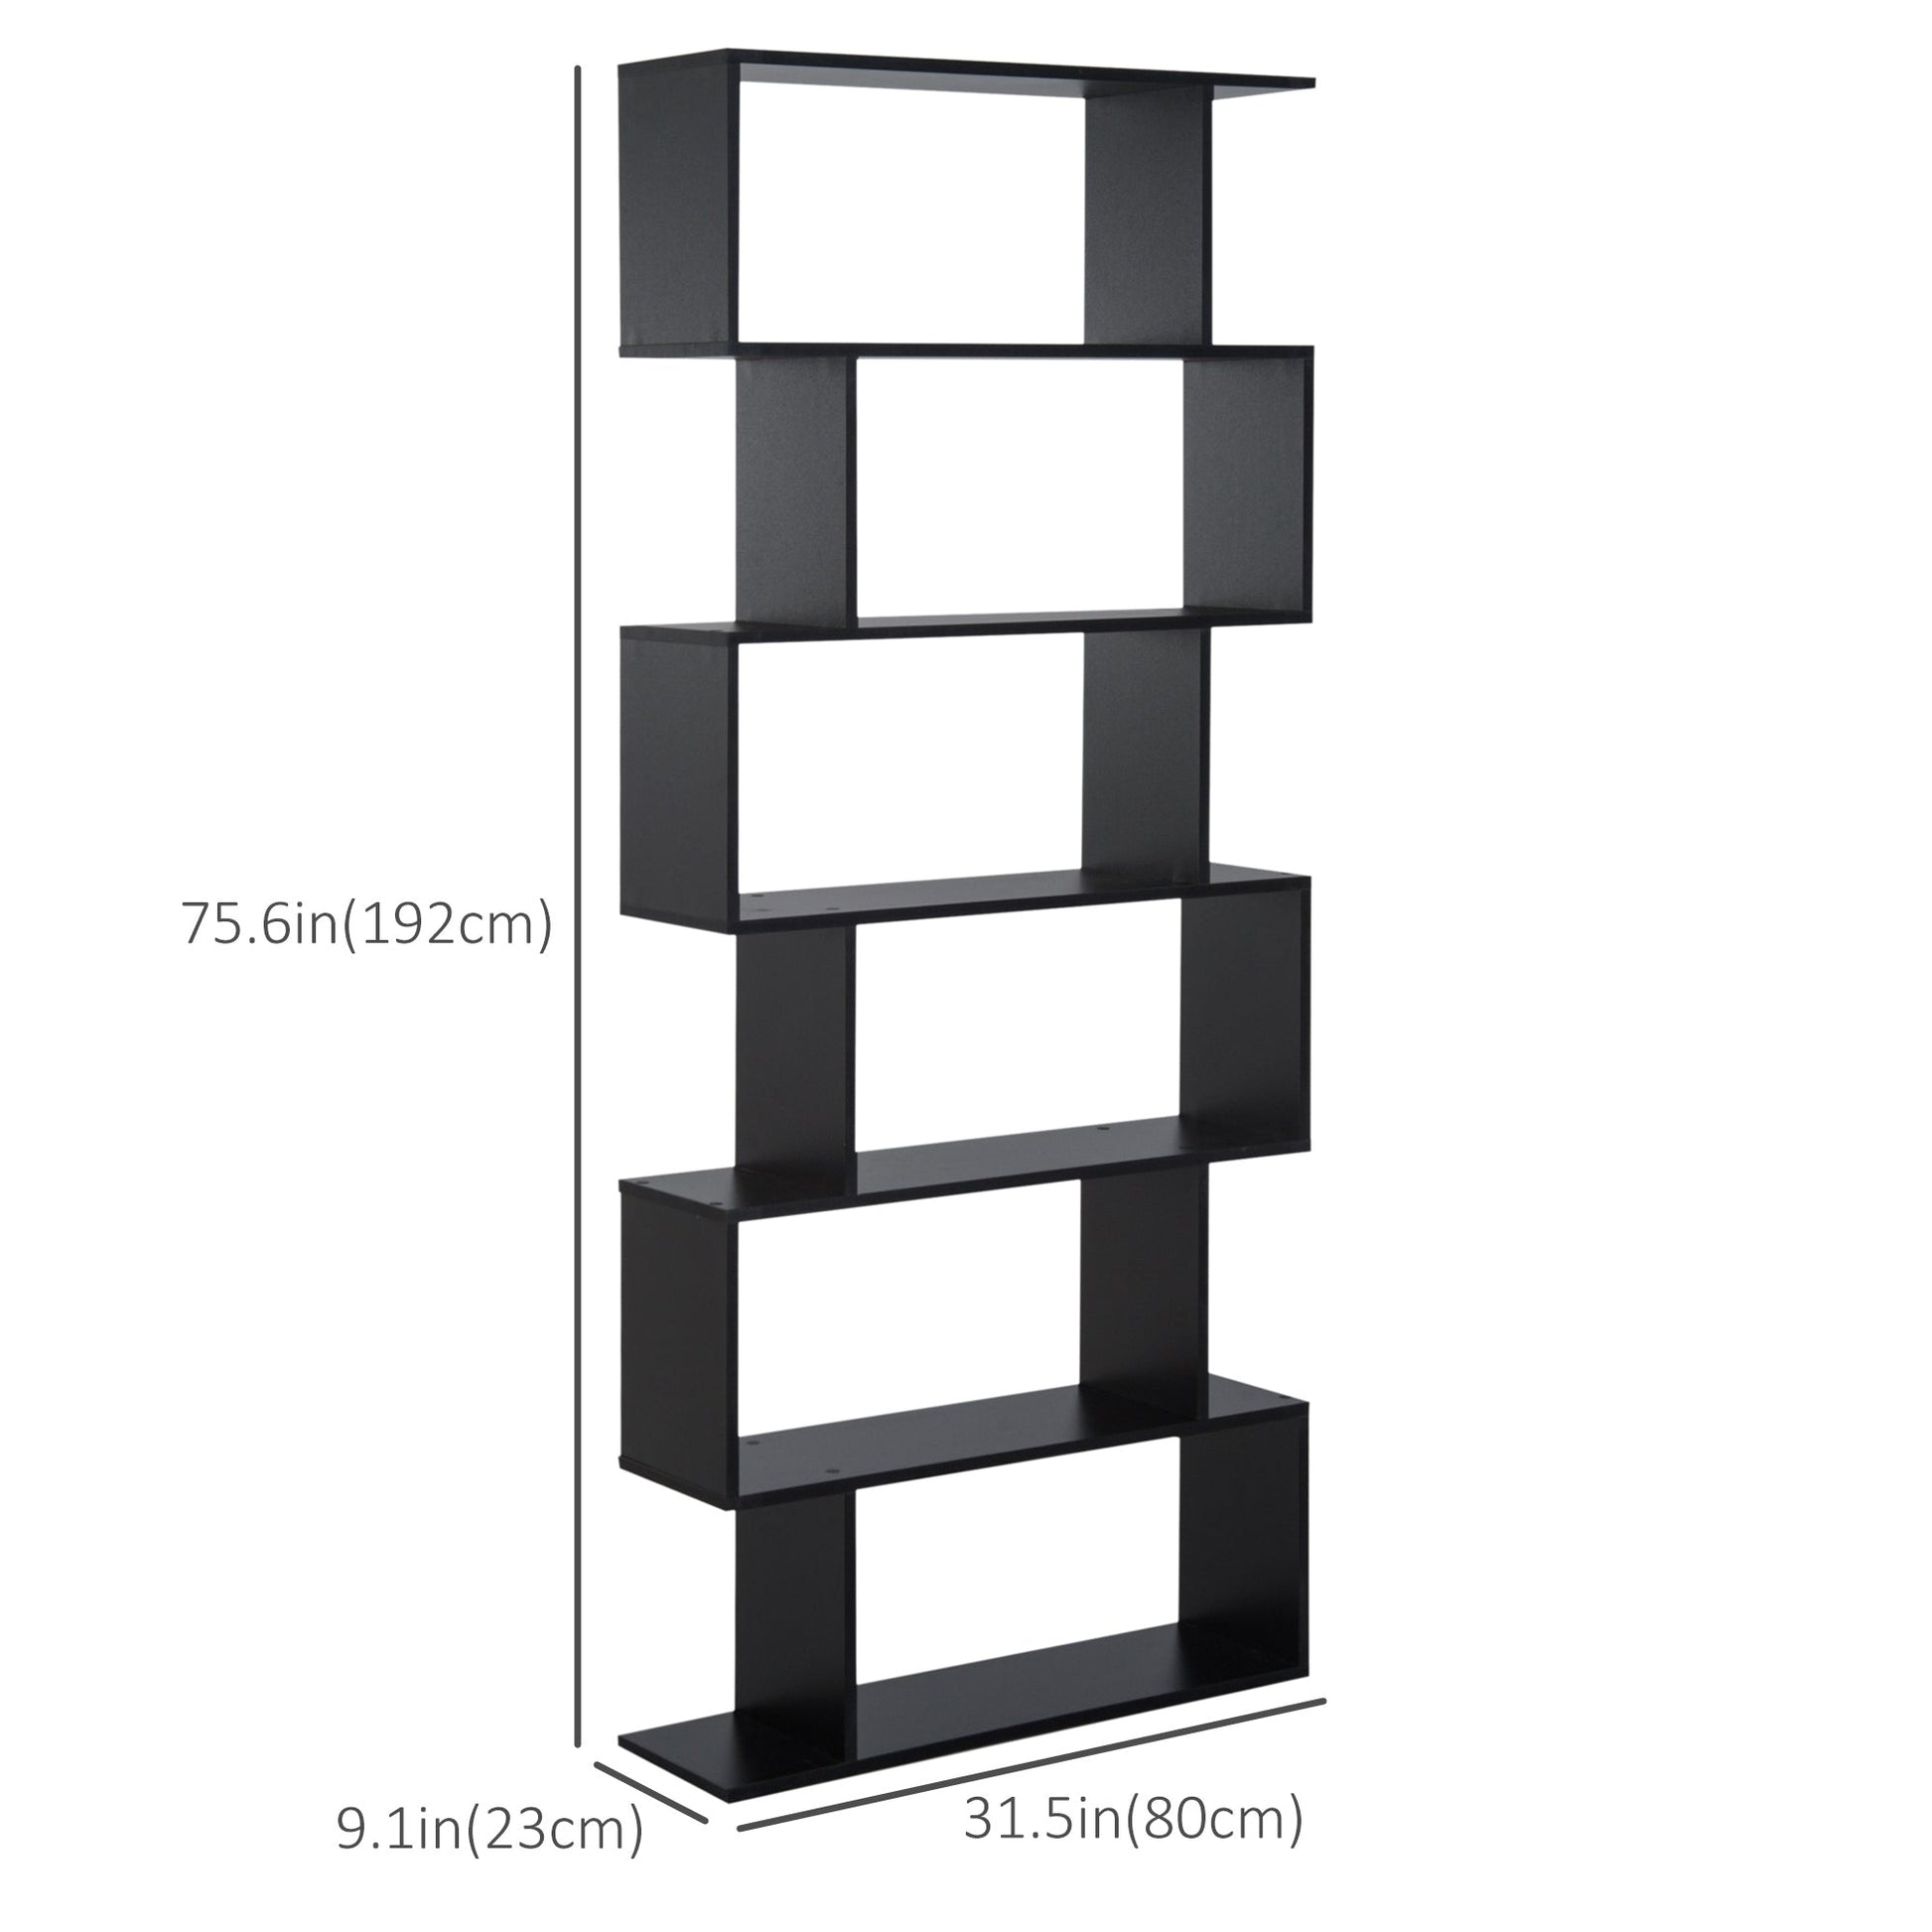 76" 6-Tier Wooden Bookcase S Shaped Storage Display Shelf Modern Bookshelf Open Concept Living Room Home Office Furniture, Black - Gallery Canada